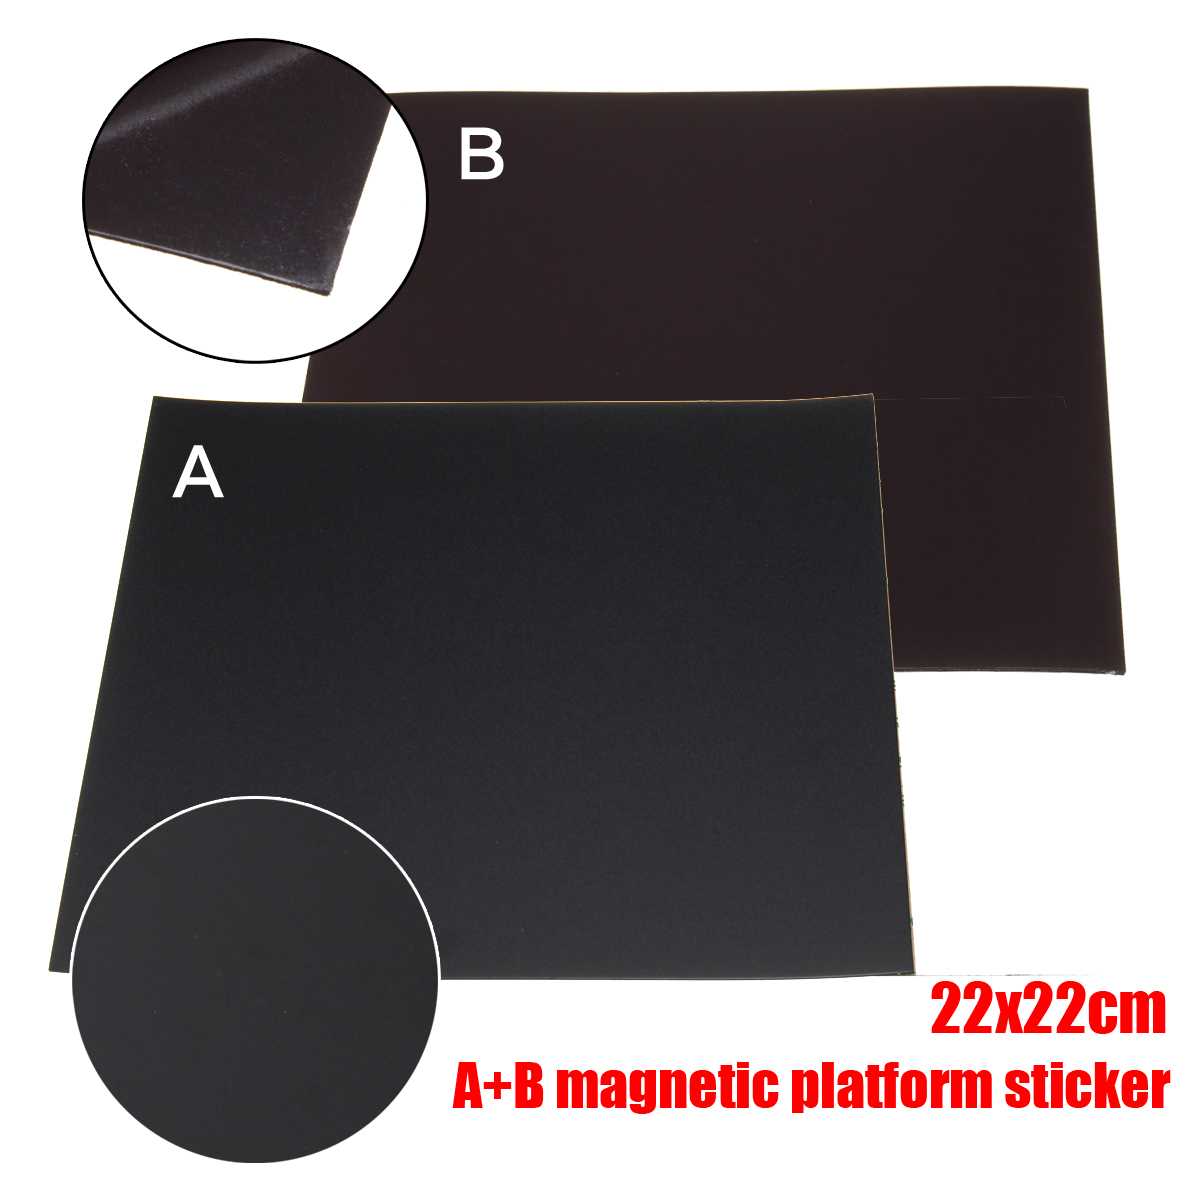 22x22cm A+B Magnetic Sheet Surface Platform Sticker For 3D Printer Creality Ender-3 Heated Bed 34